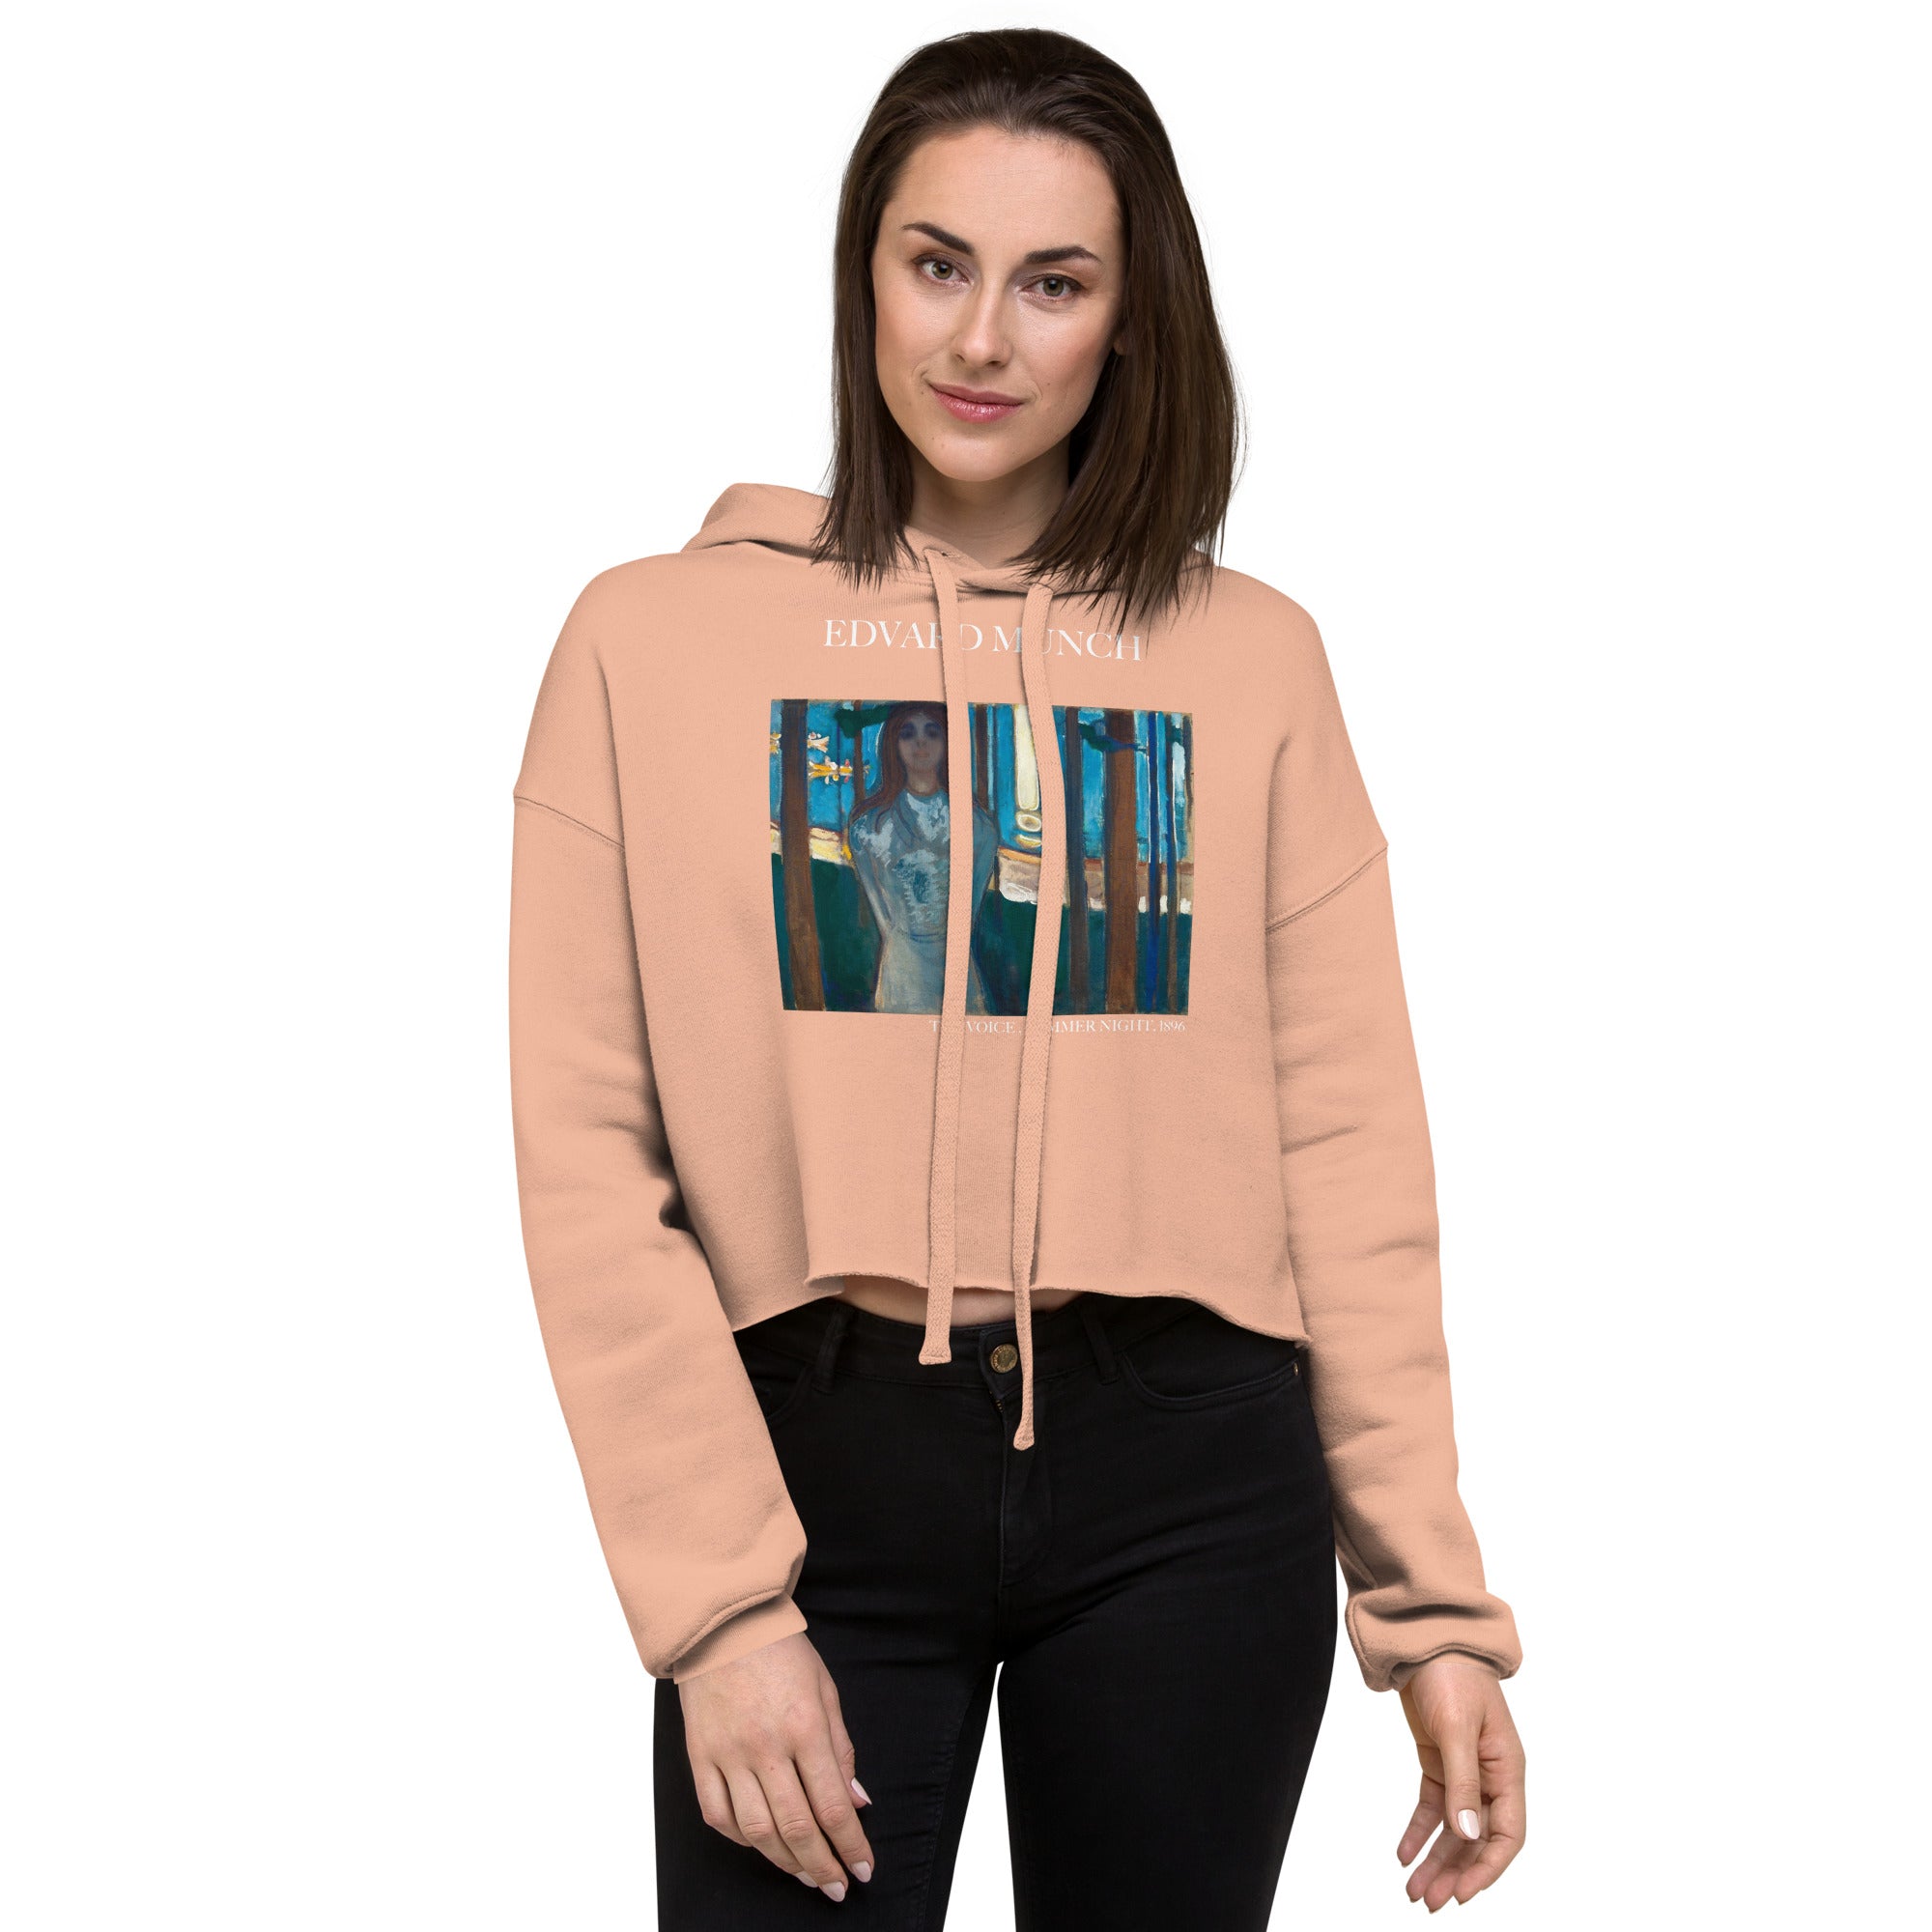 Edvard Munch 'The Voice, Summer Night' Famous Painting Cropped Hoodie | Premium Art Cropped Hoodie